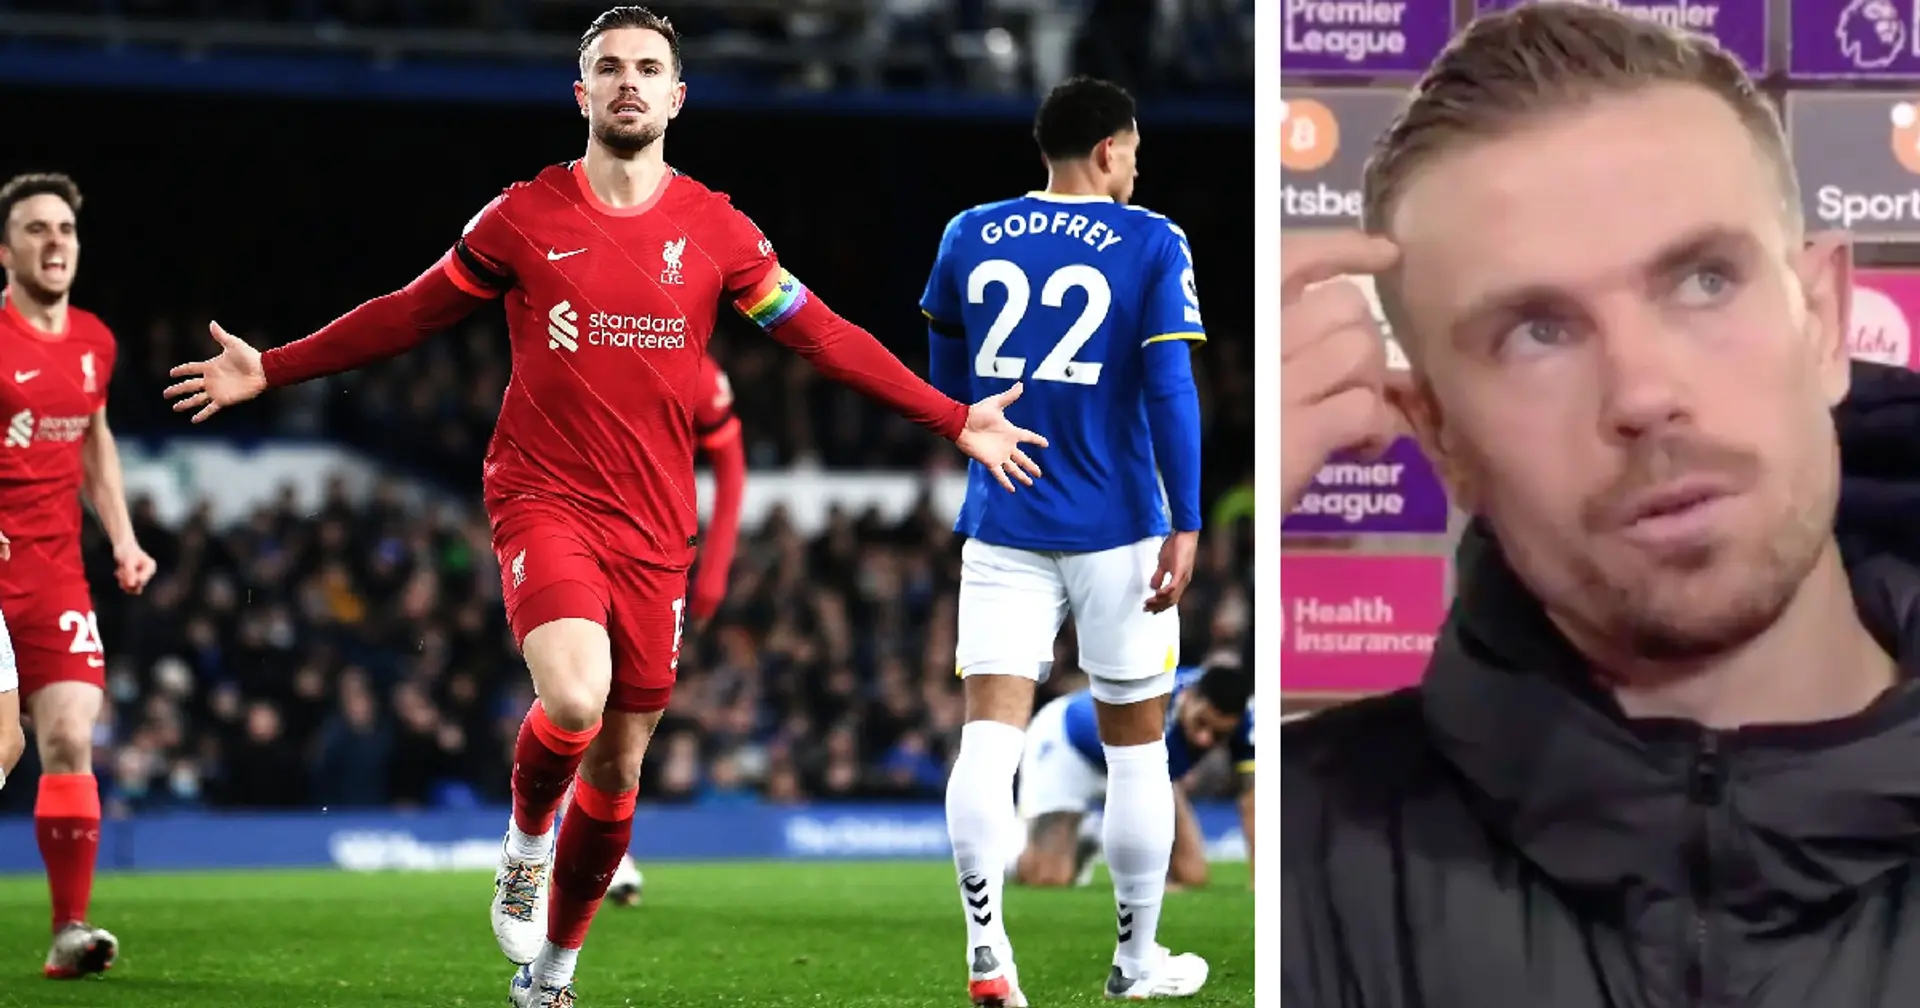 Henderson on his first goal against Everton and 'outstanding' Salah